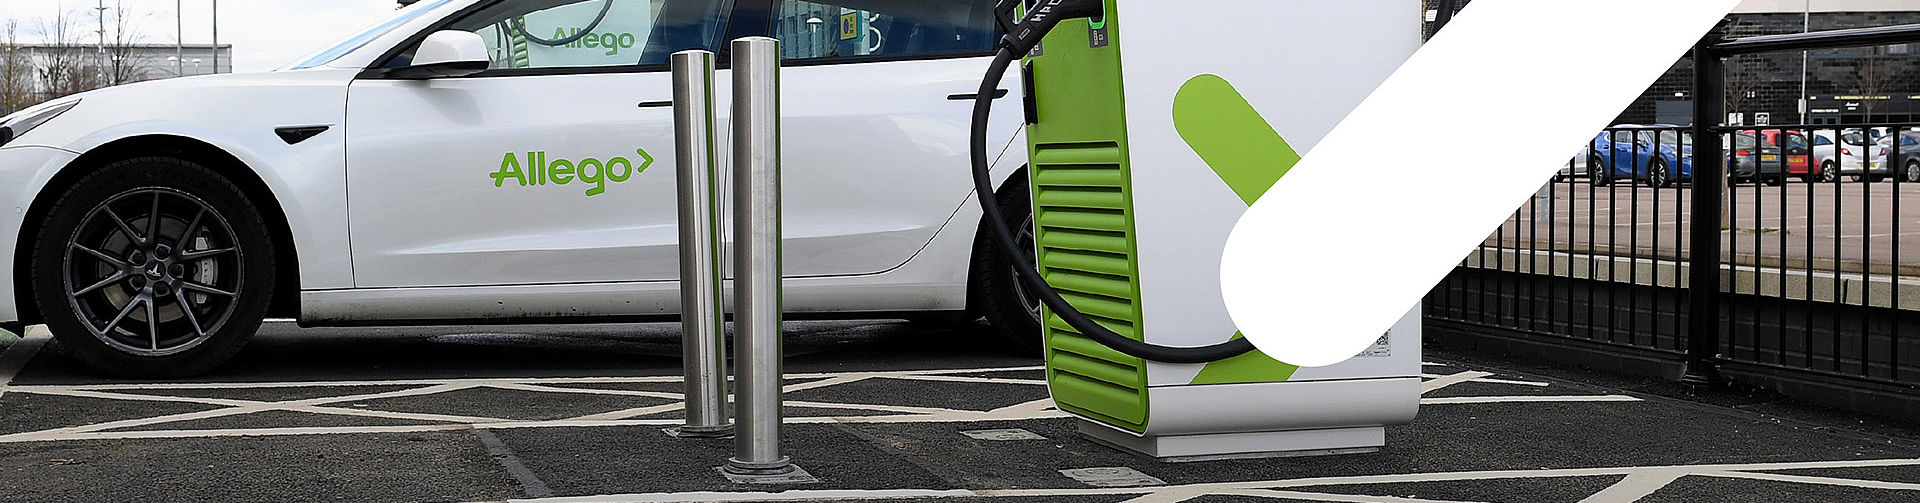 Allego and OIL! tank & go establish first-of-its-kind partnership in Denmark to install ultra-fast charging network; fourteen sites underway and further expansion slated